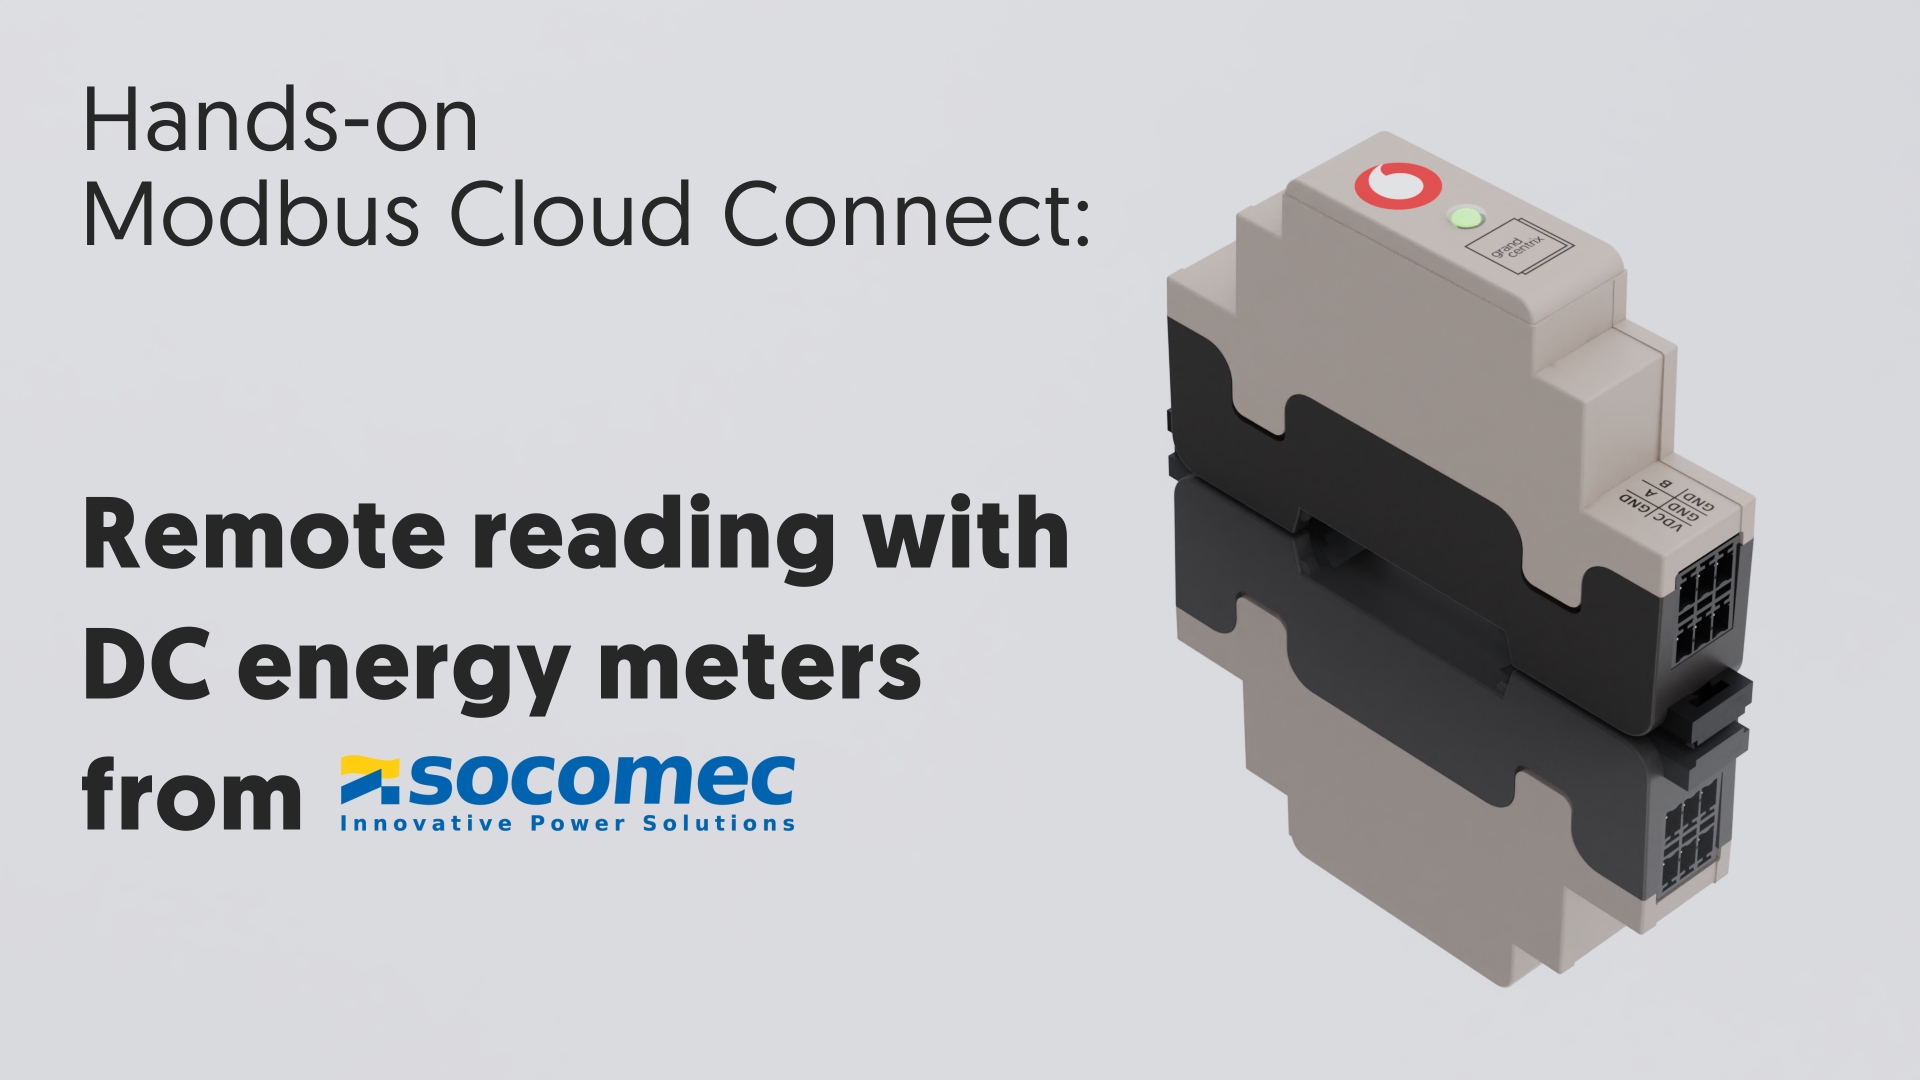 Hands-on Modbus Cloud Connect - Remote Reading with DC Energy Meters